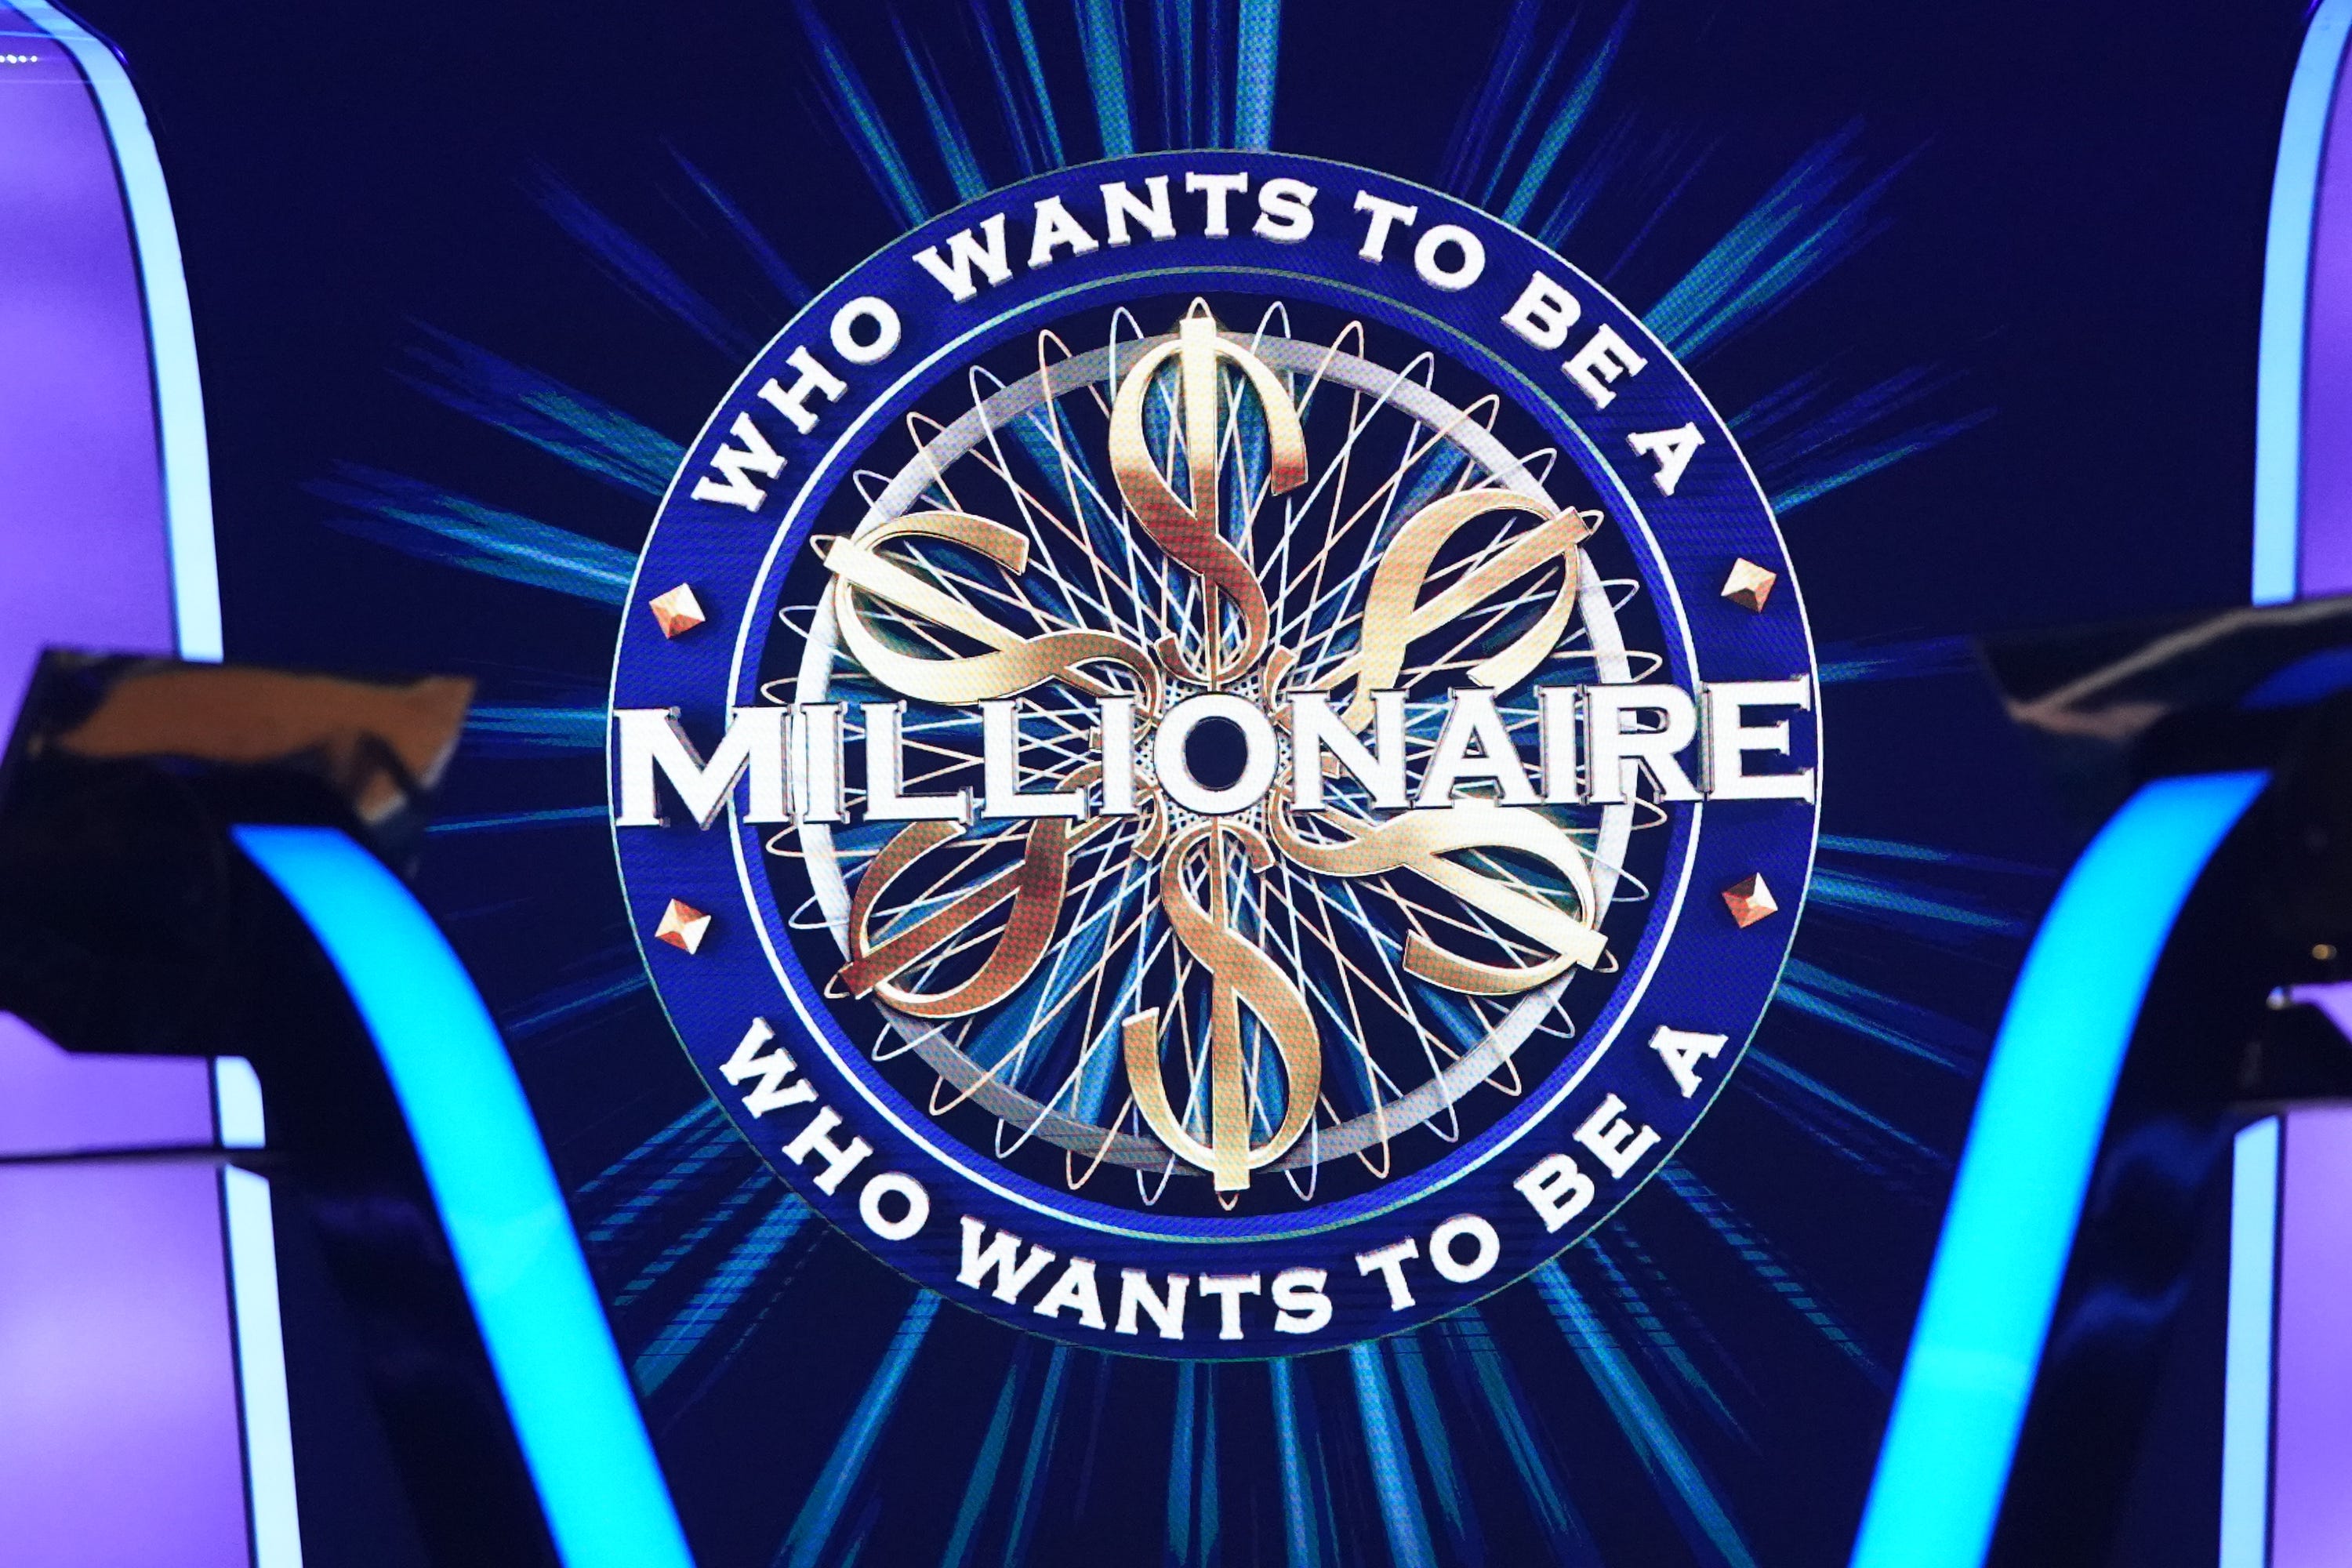 new who wants to be a millionaire trivia app